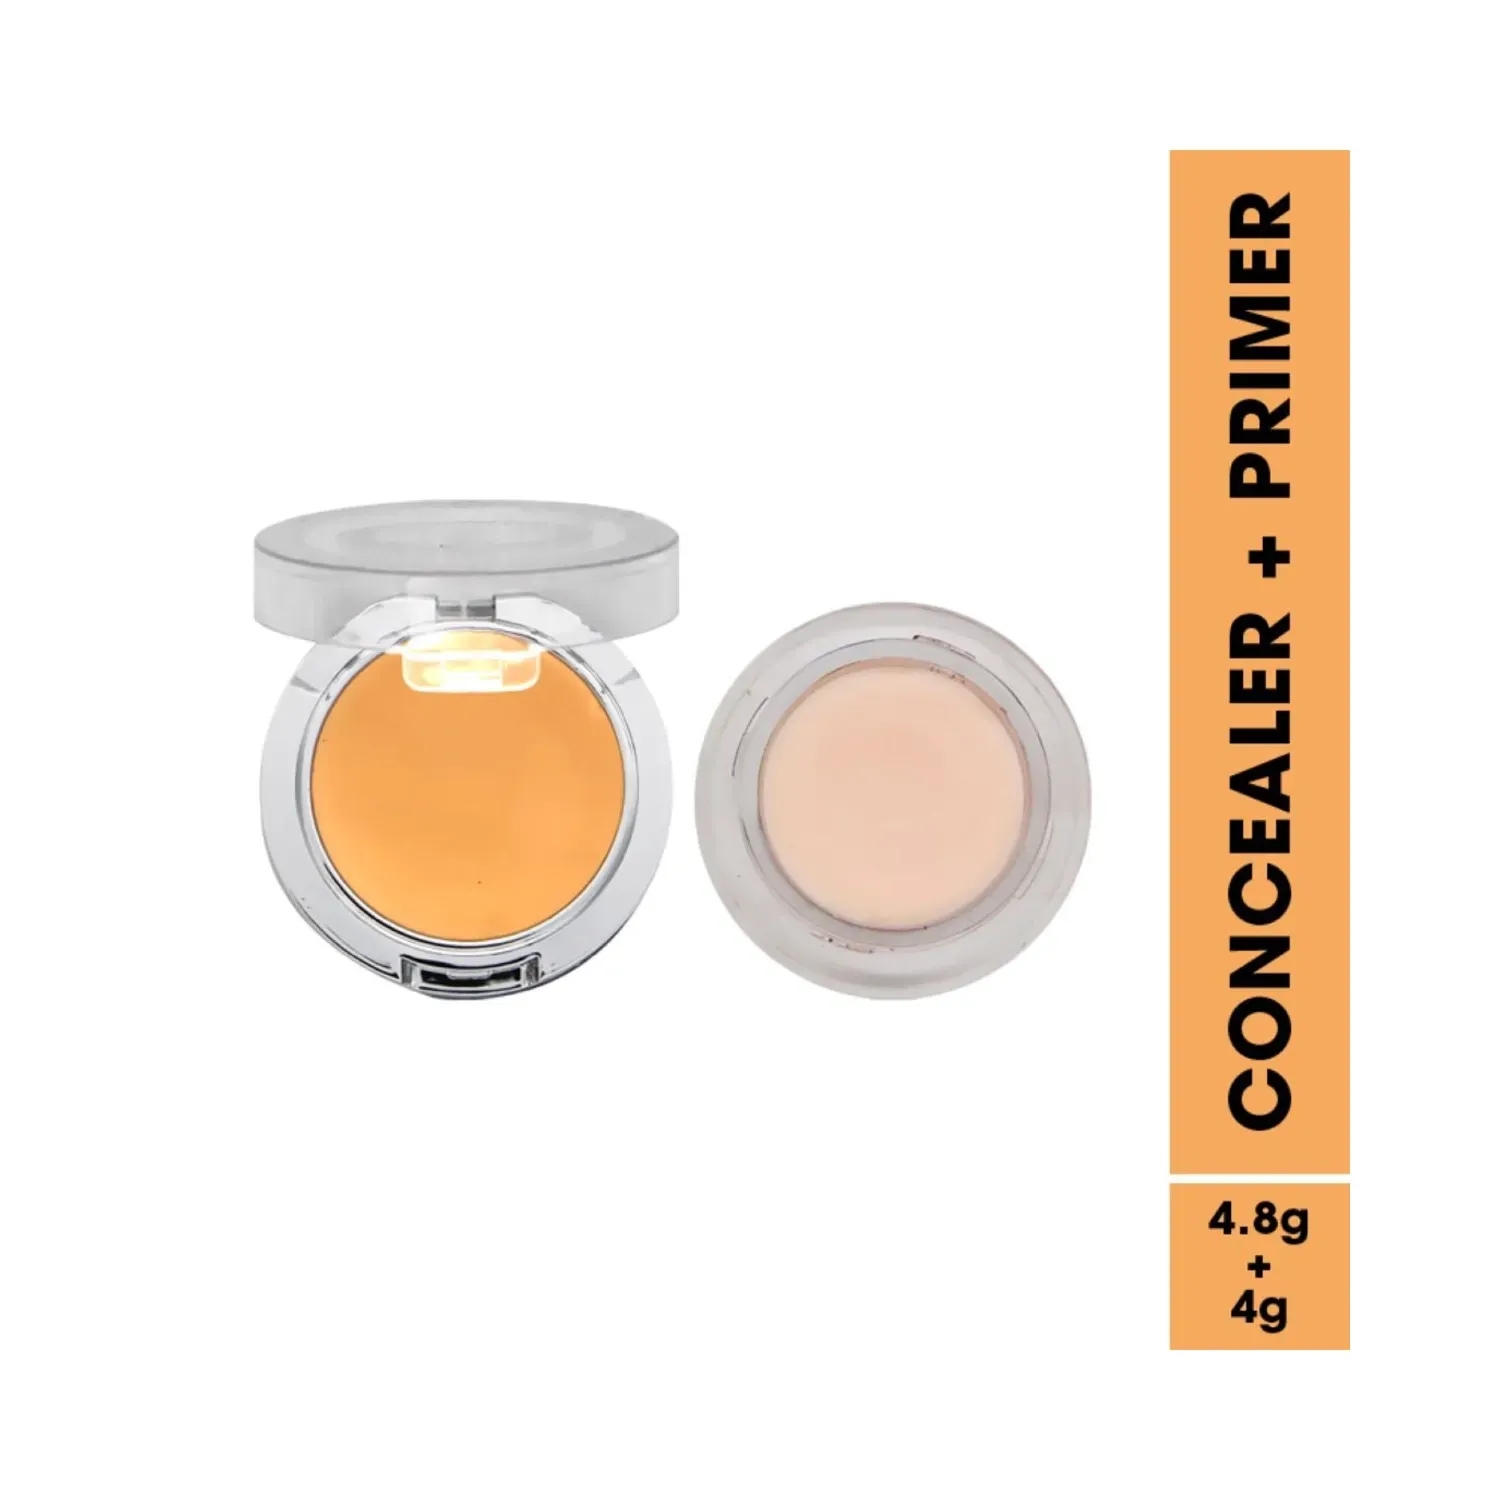 Fashion Colour | Fashion Colour 2-In-1 Primer And Concealer - 02 Shade (4.8g + 4g)